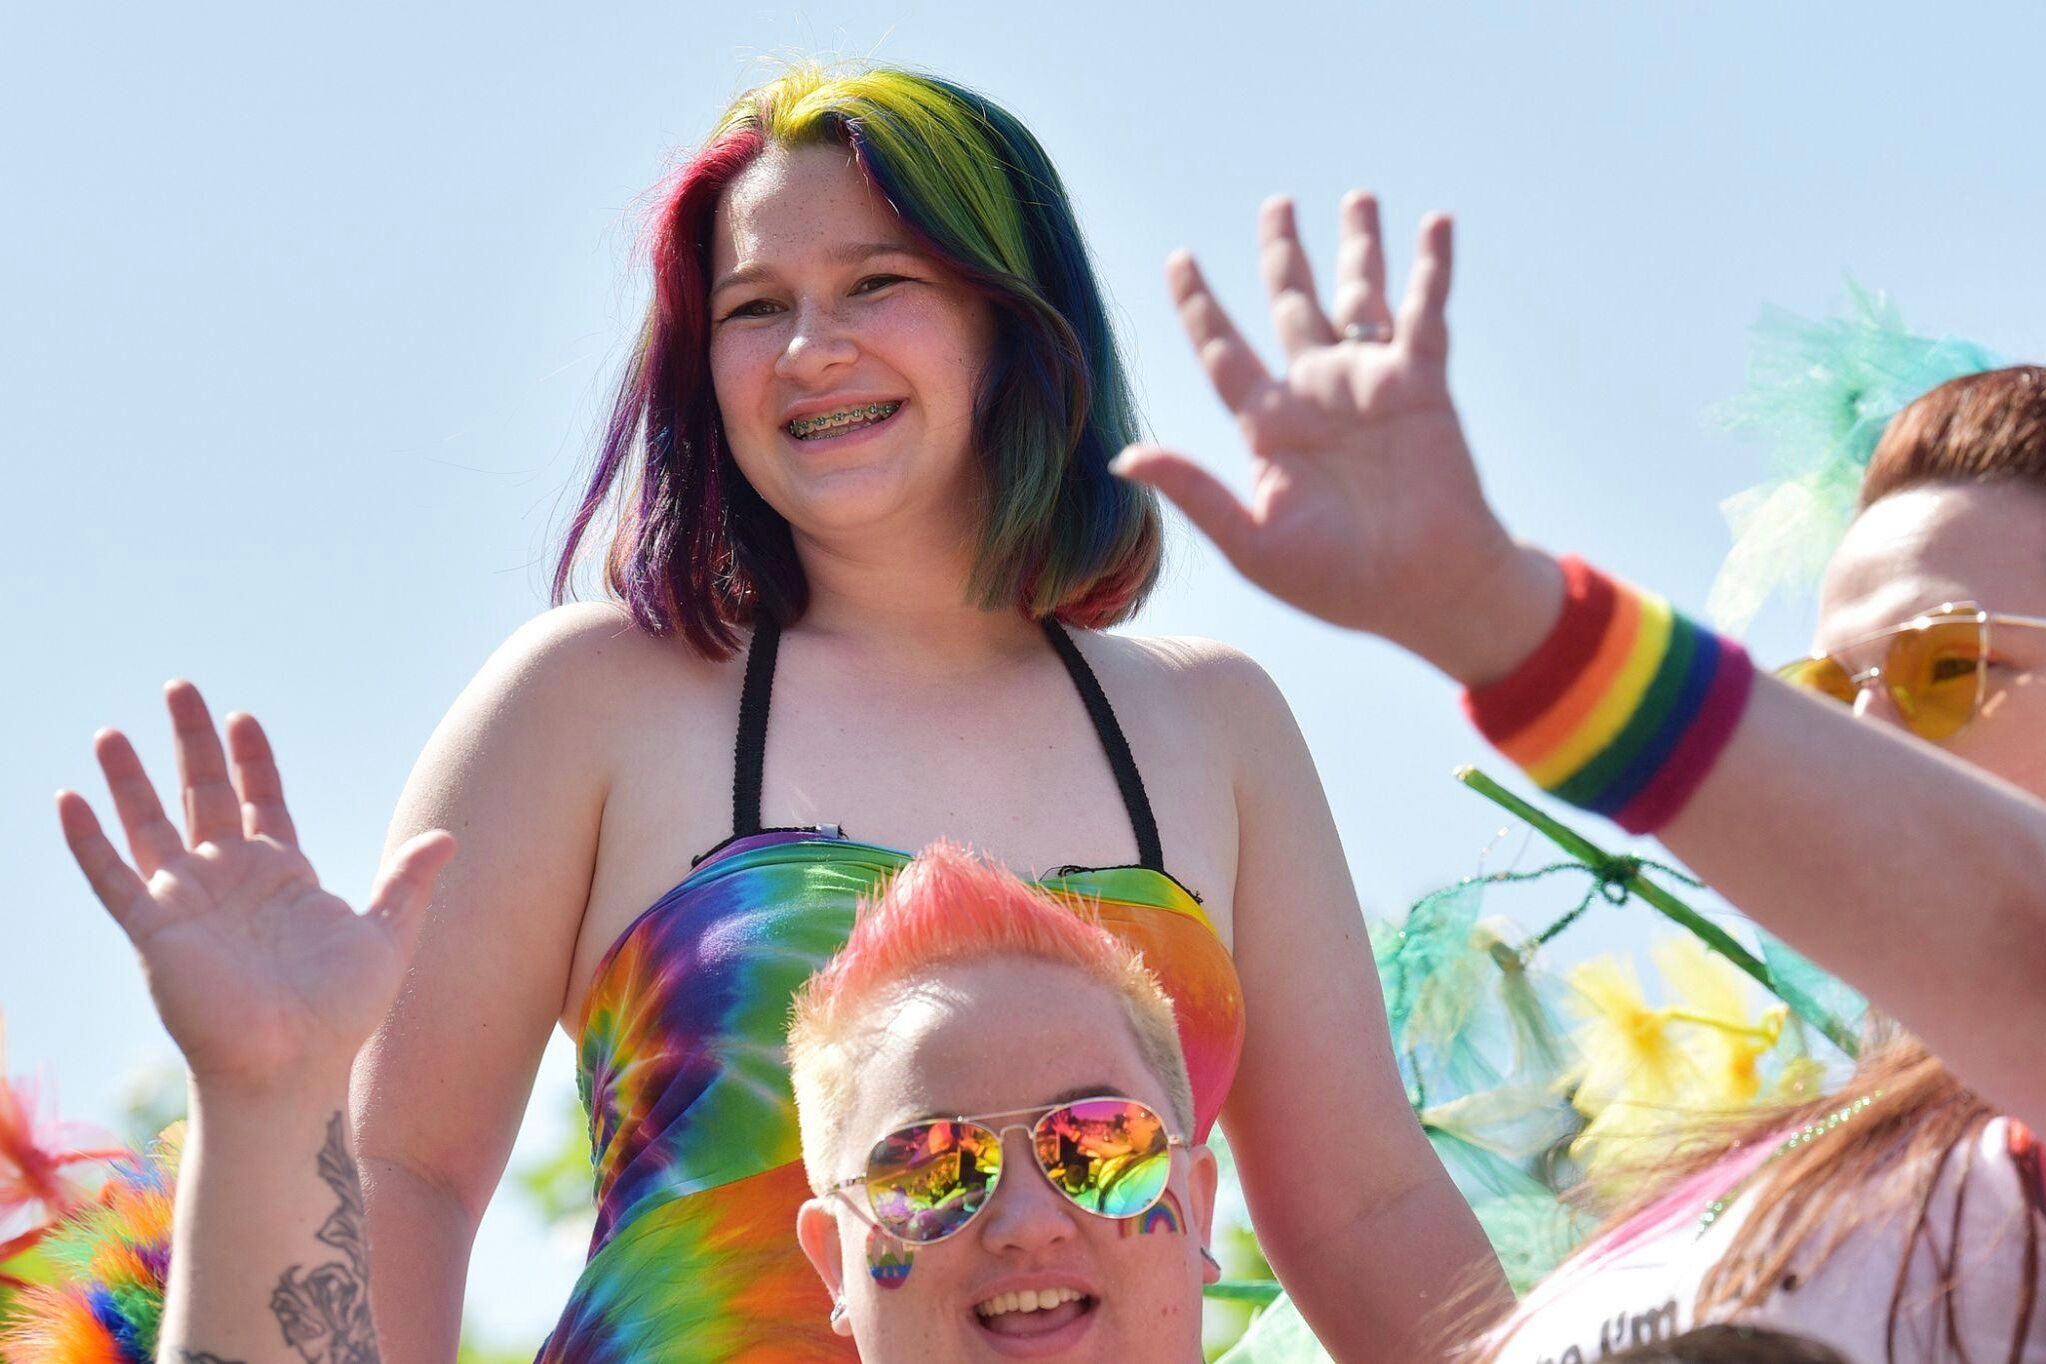 Molly Pinta, center, aboard a float during Buffalo Grove’s inaugural Pride Parade, 2019. Photo by Karie Angell Luc